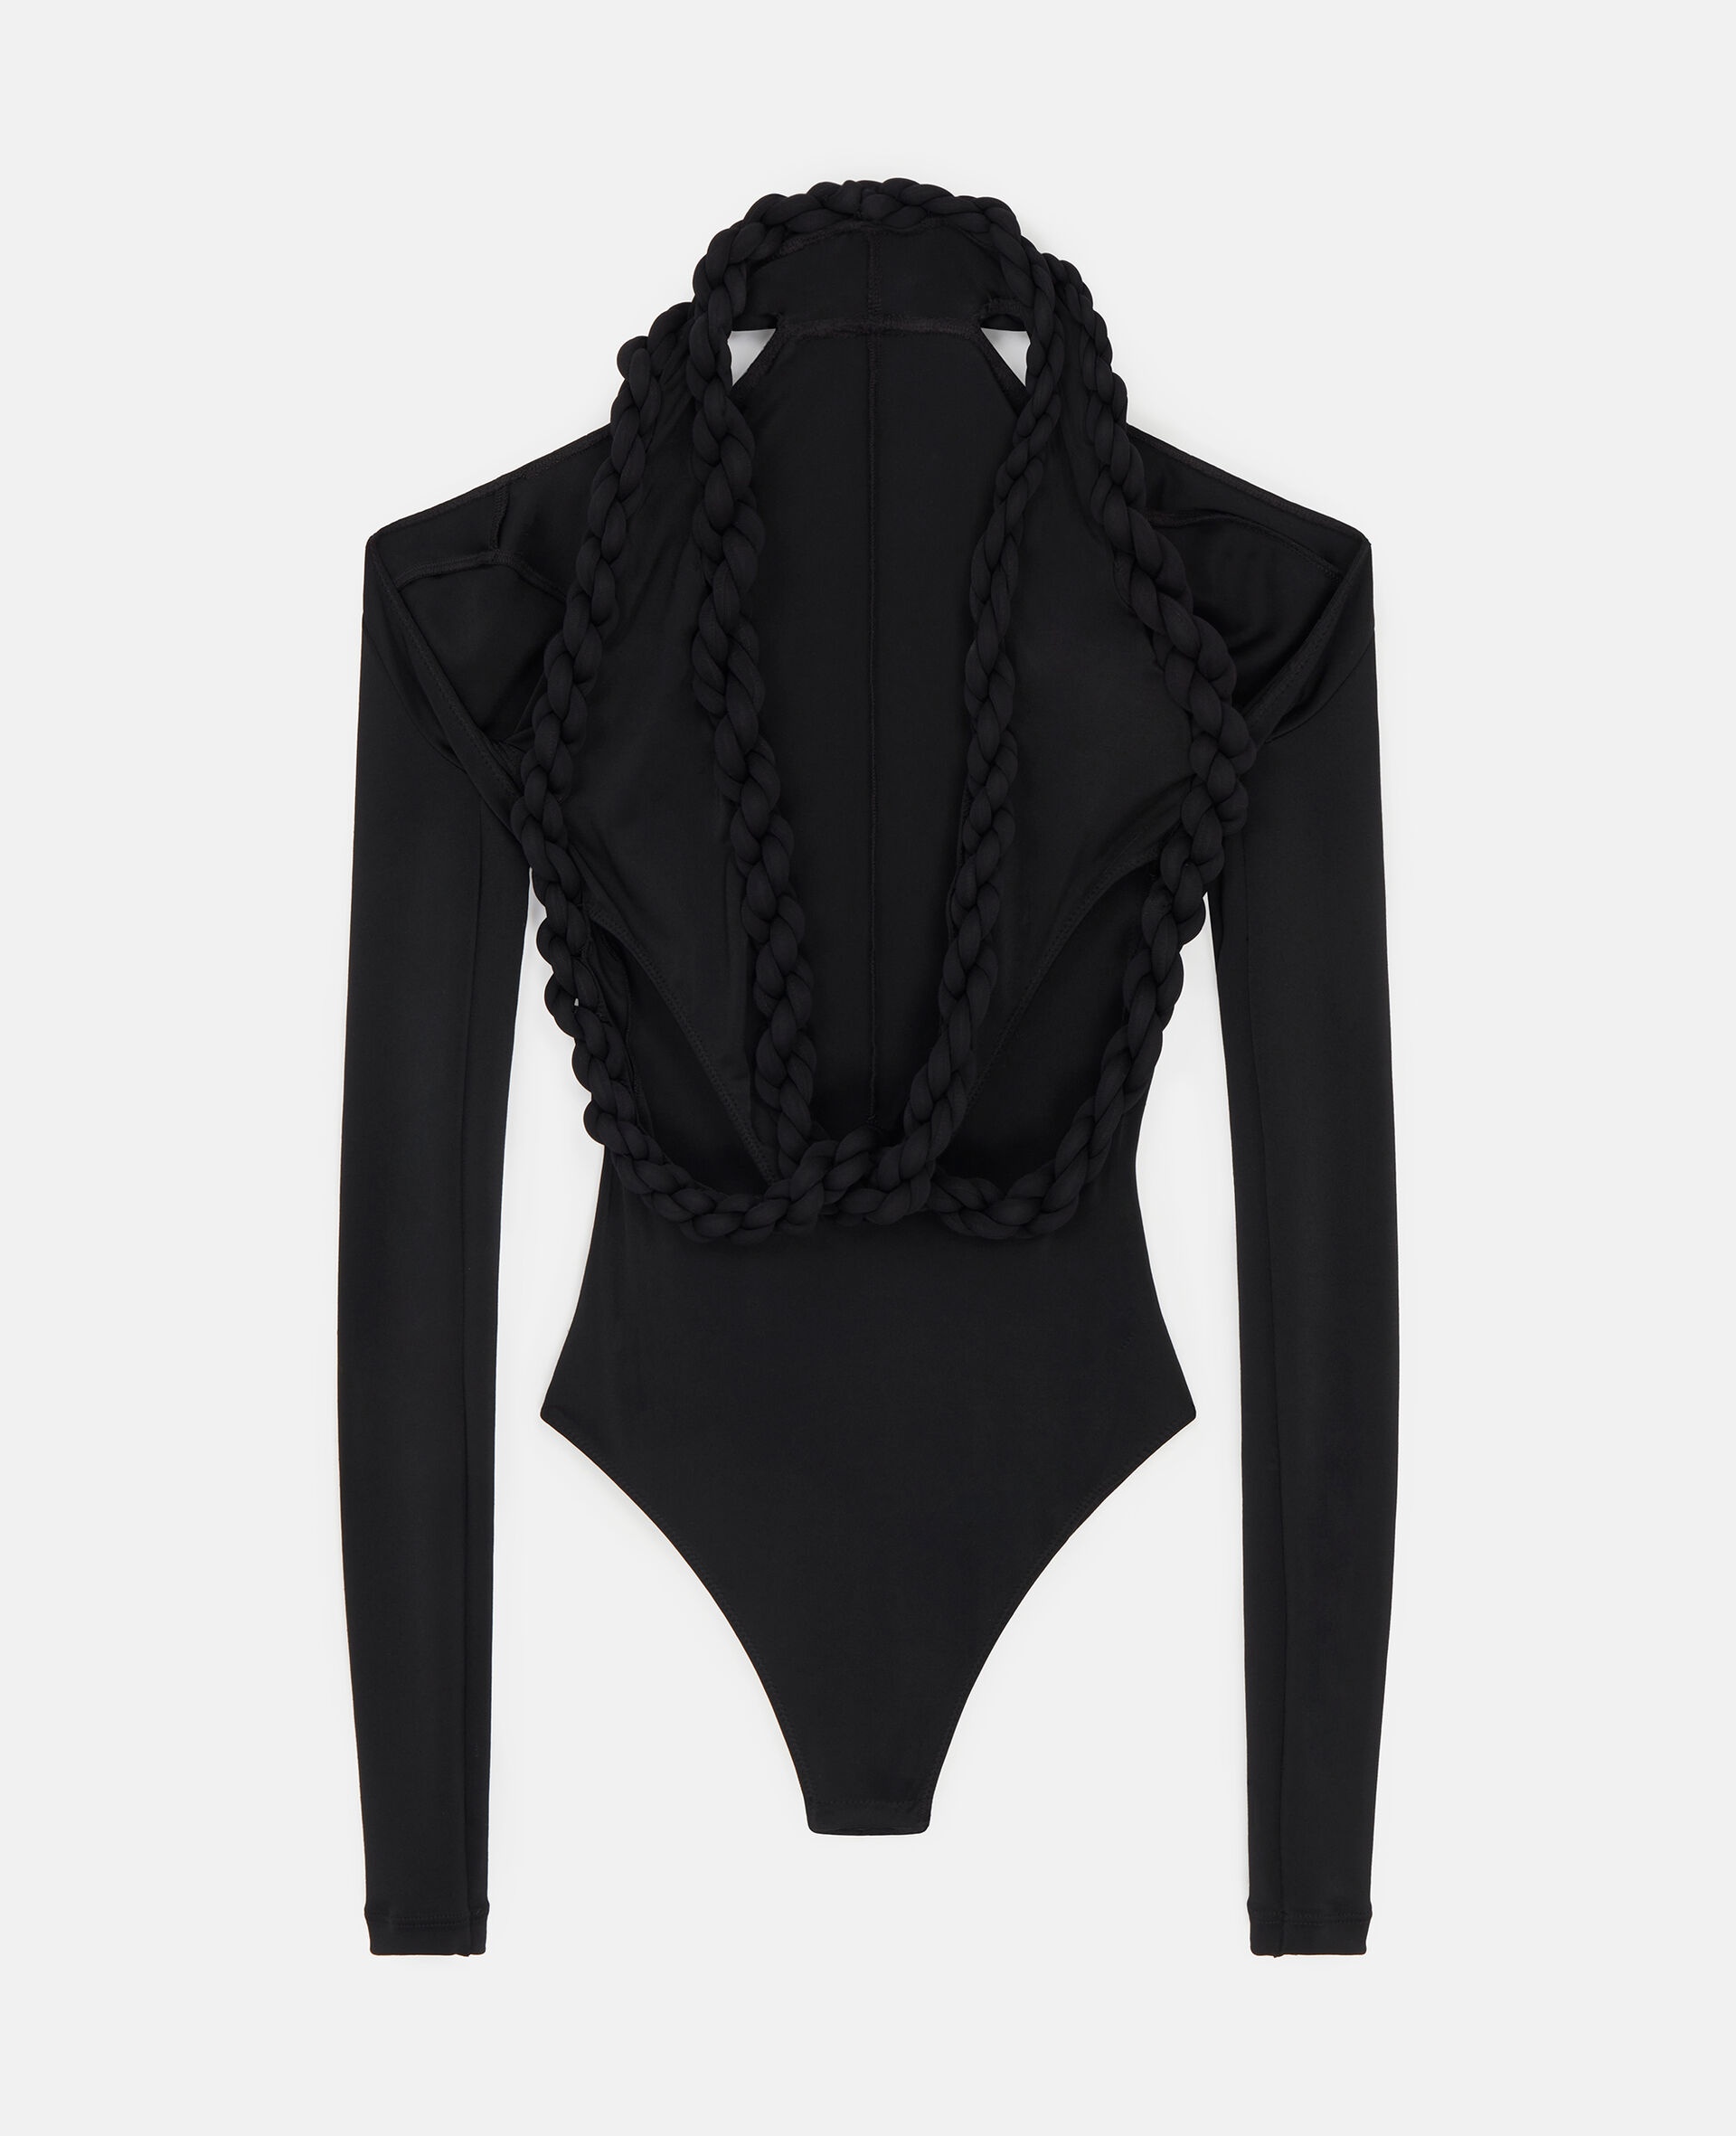 Braided Rope Cut-Out V-Neck Bodysuit - 1